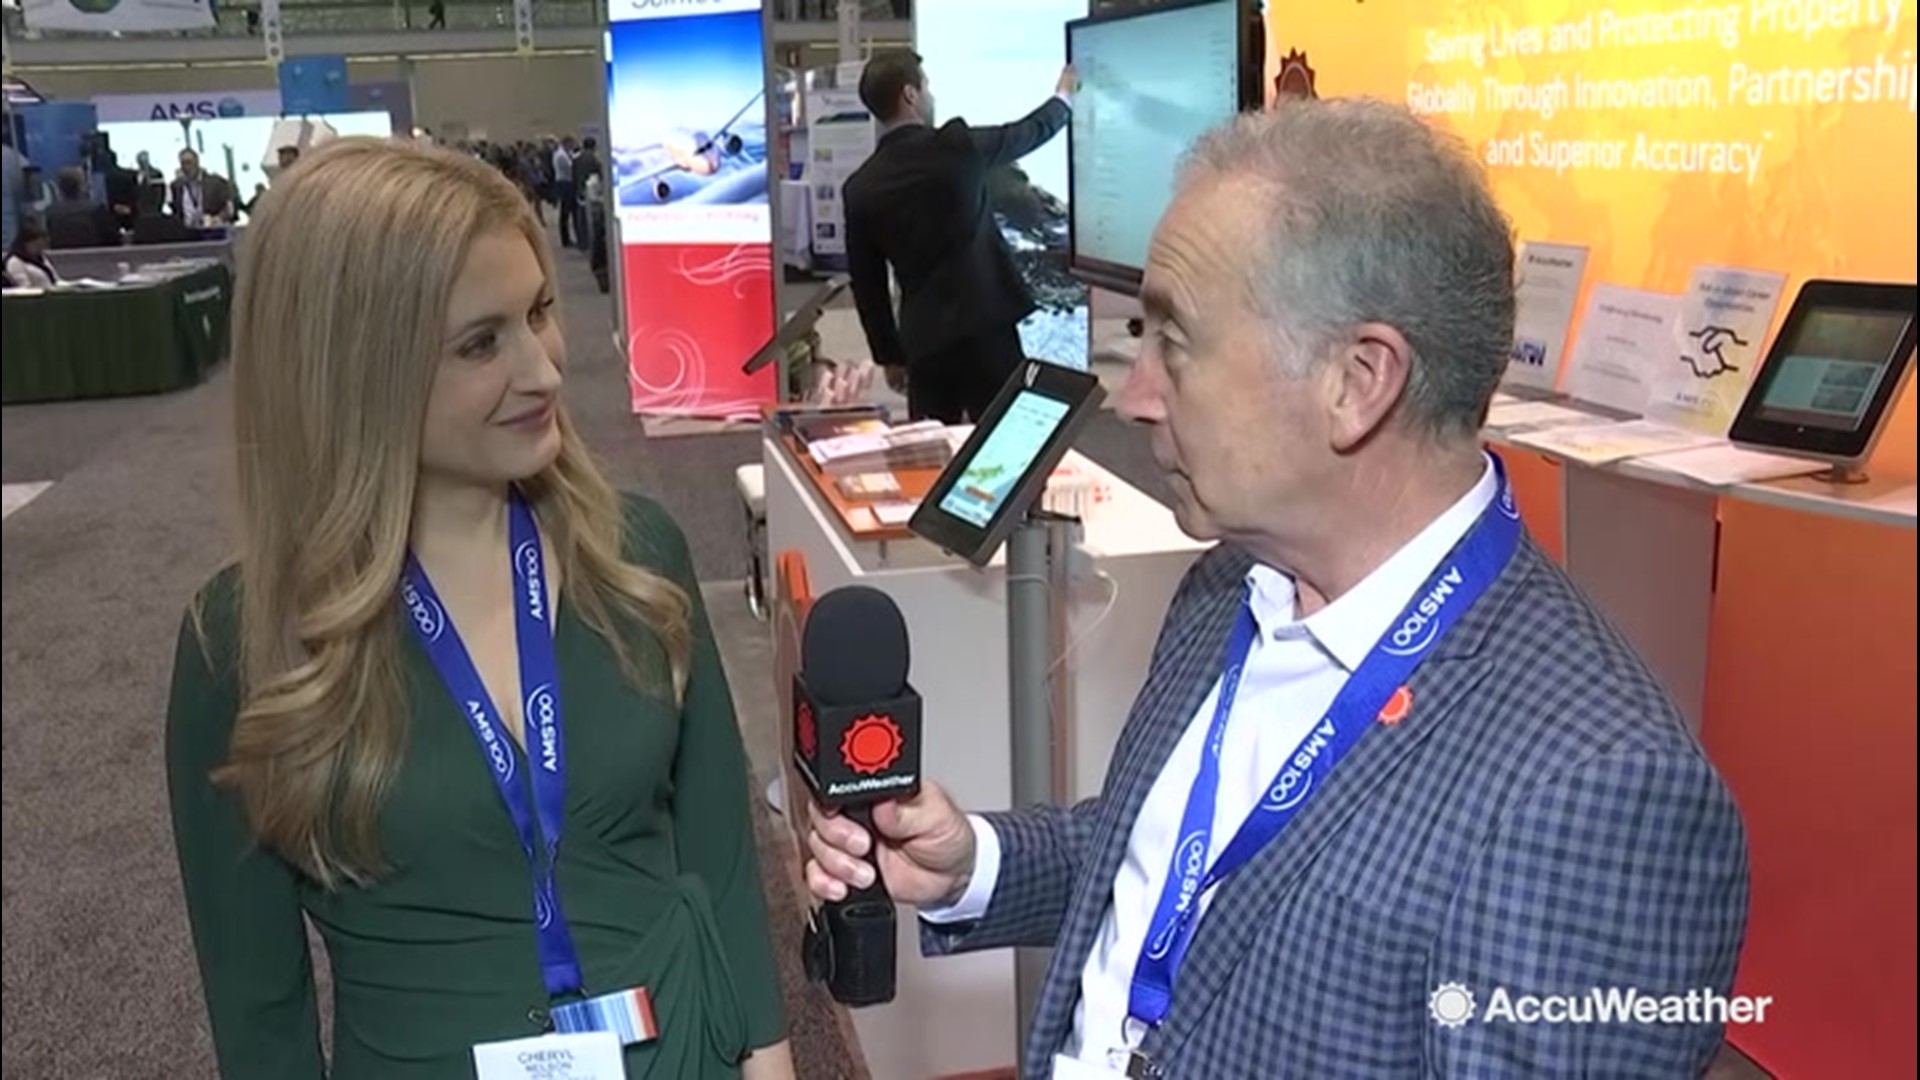 Mark Mancuso and Cheryl Nelson discuss how the industry has changed at the American Meteorological Society's 100th annual conference in Boston.